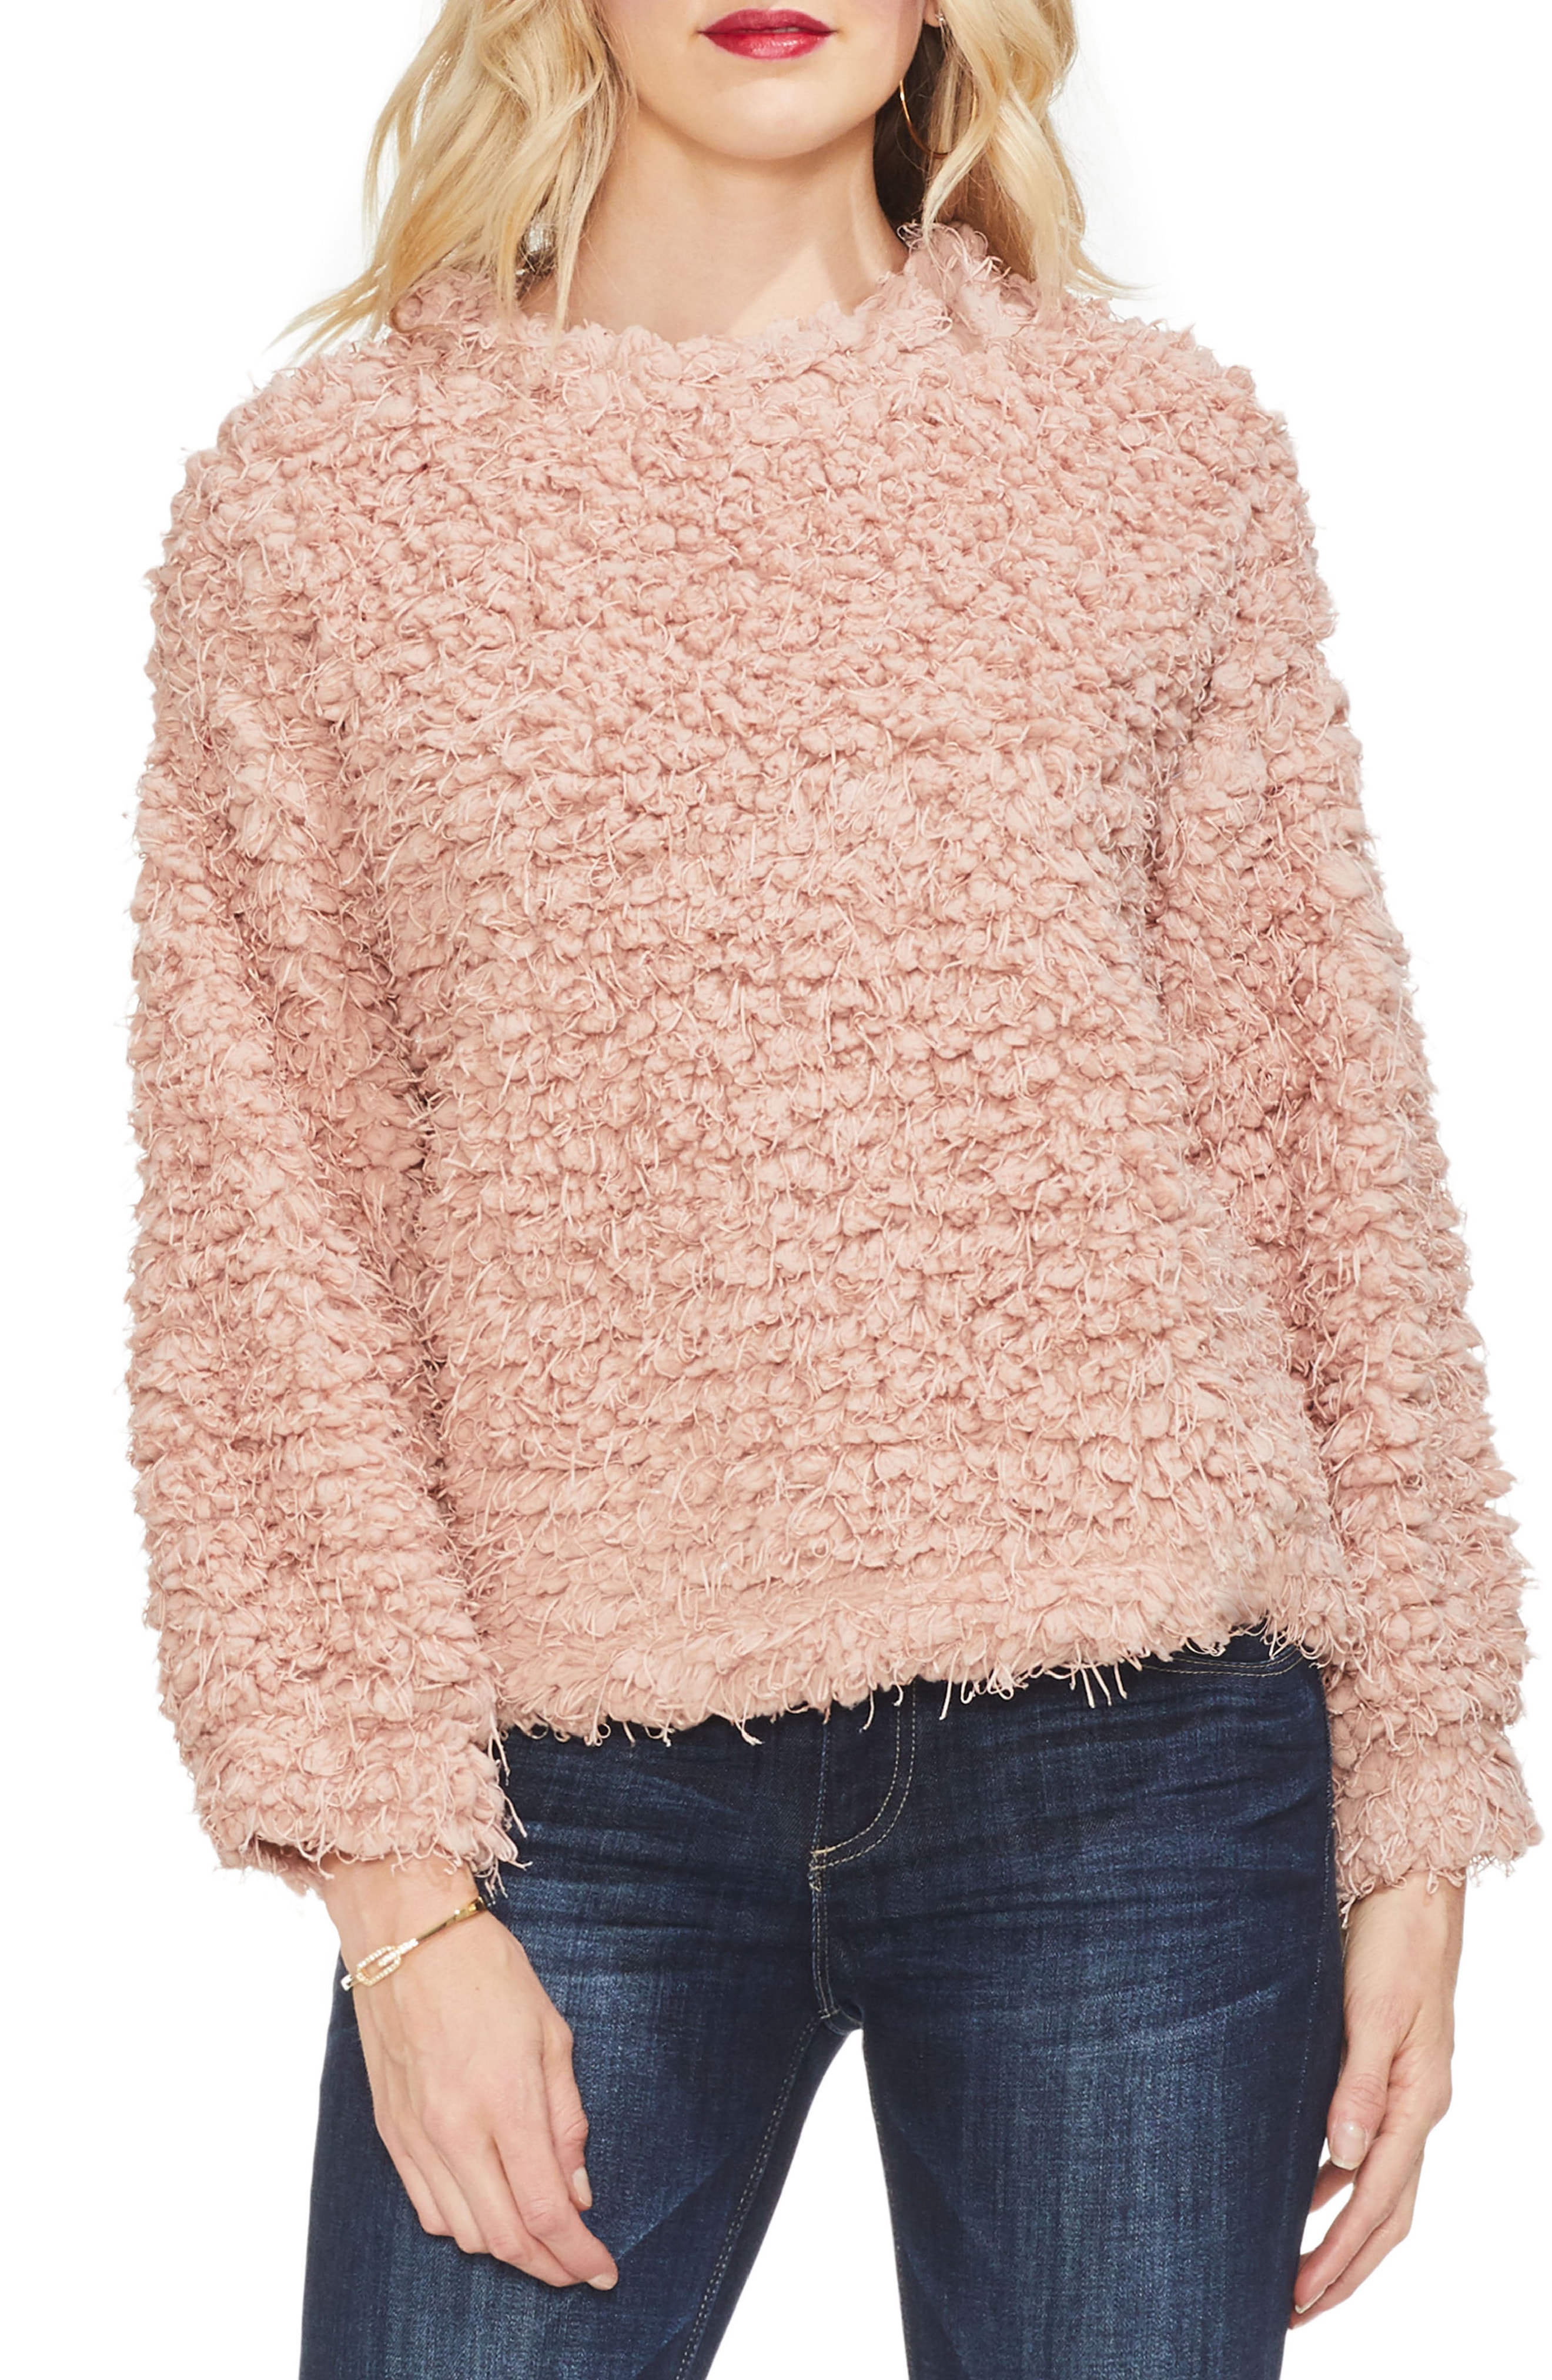 Vince Camuto Bubble Sleeve Popcorn Knit Top